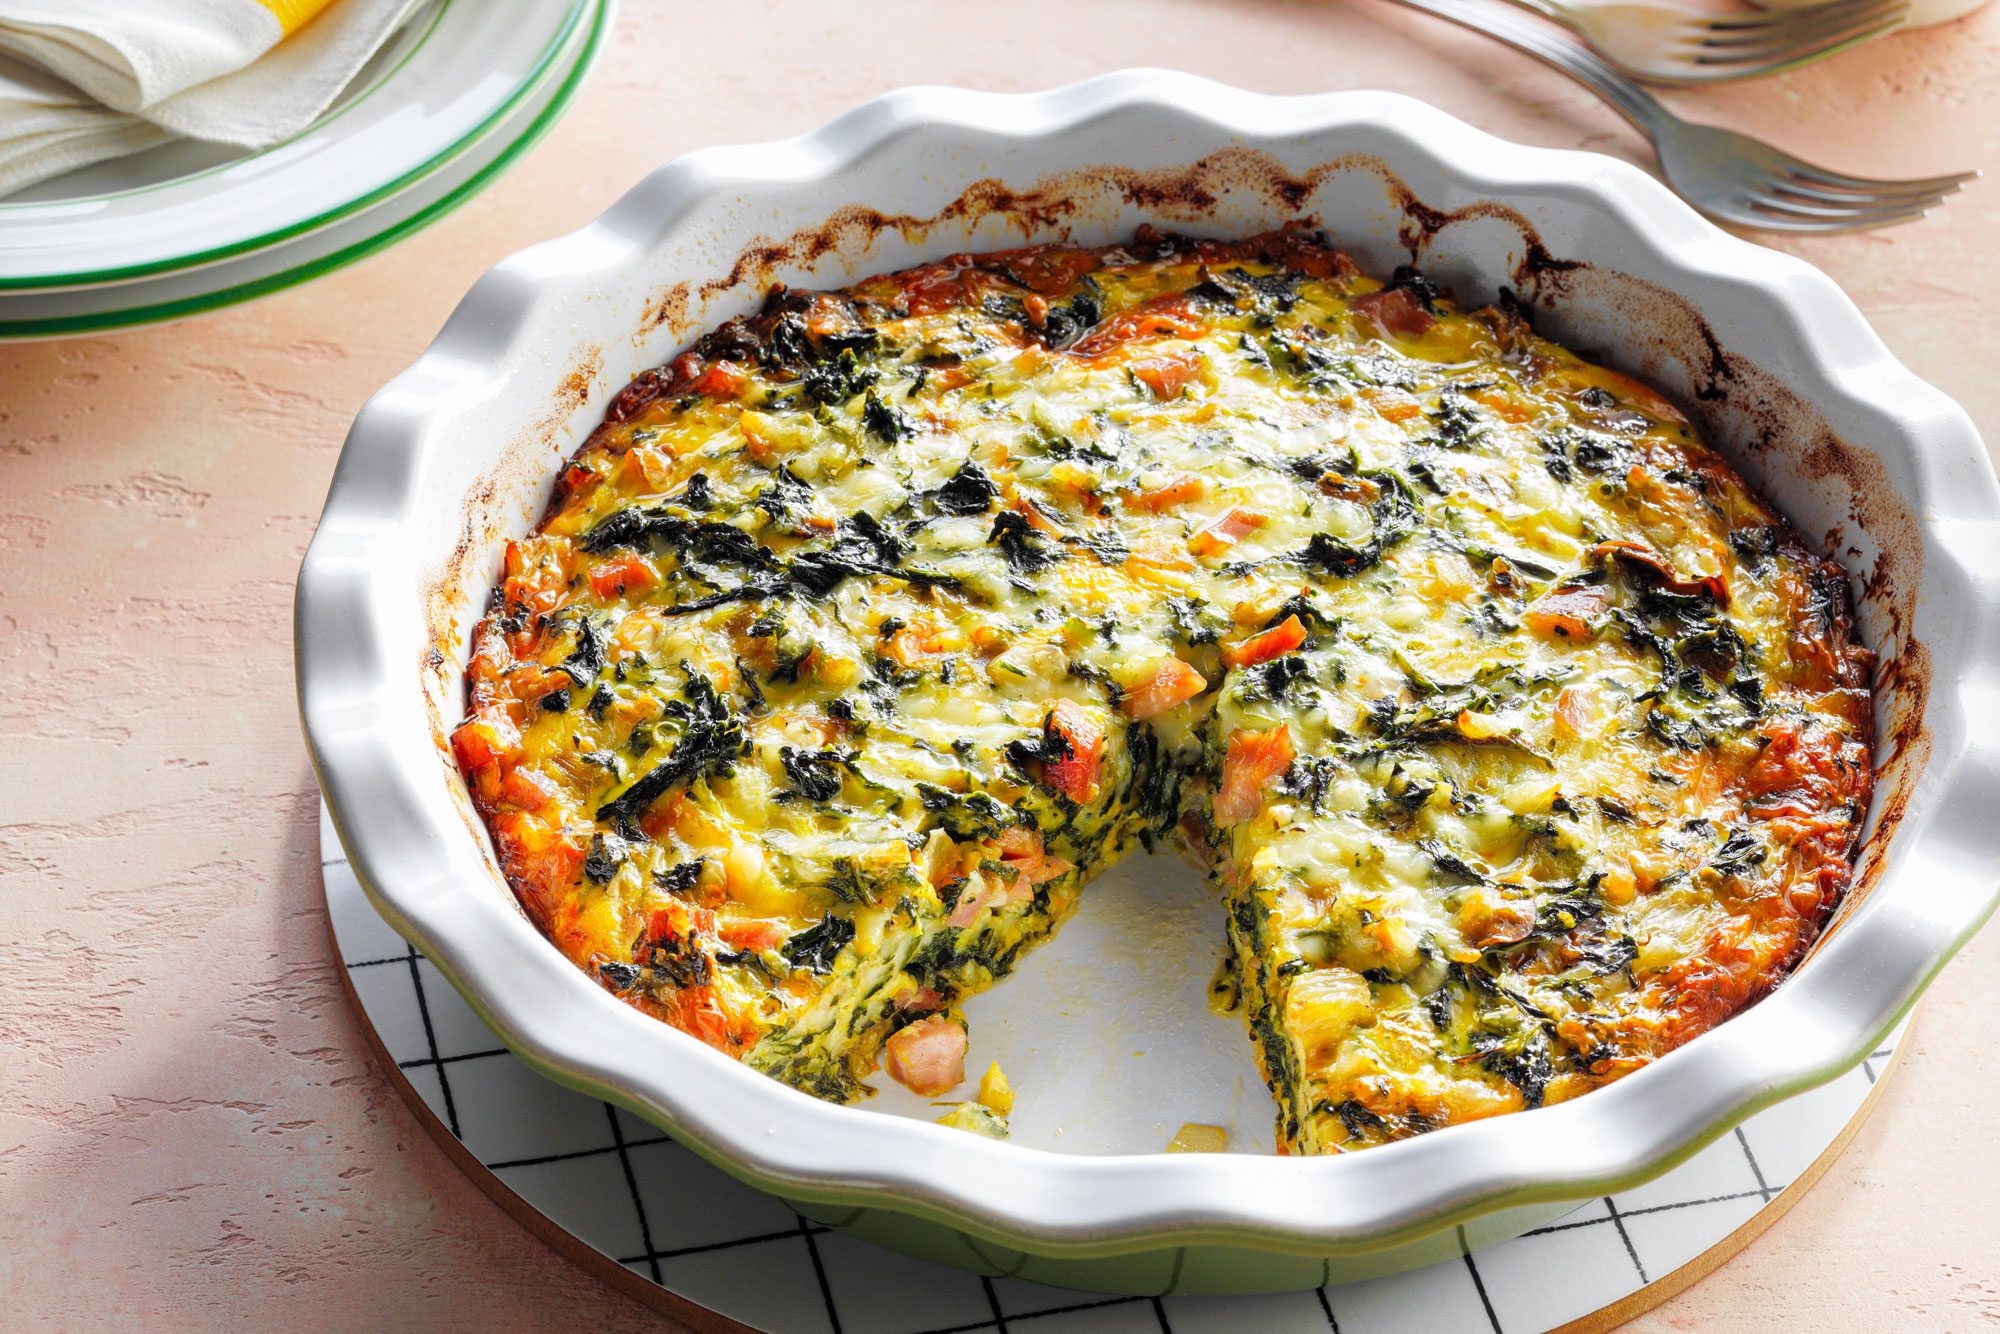 Crustless Spinach Quiche Recipe: How to Make It